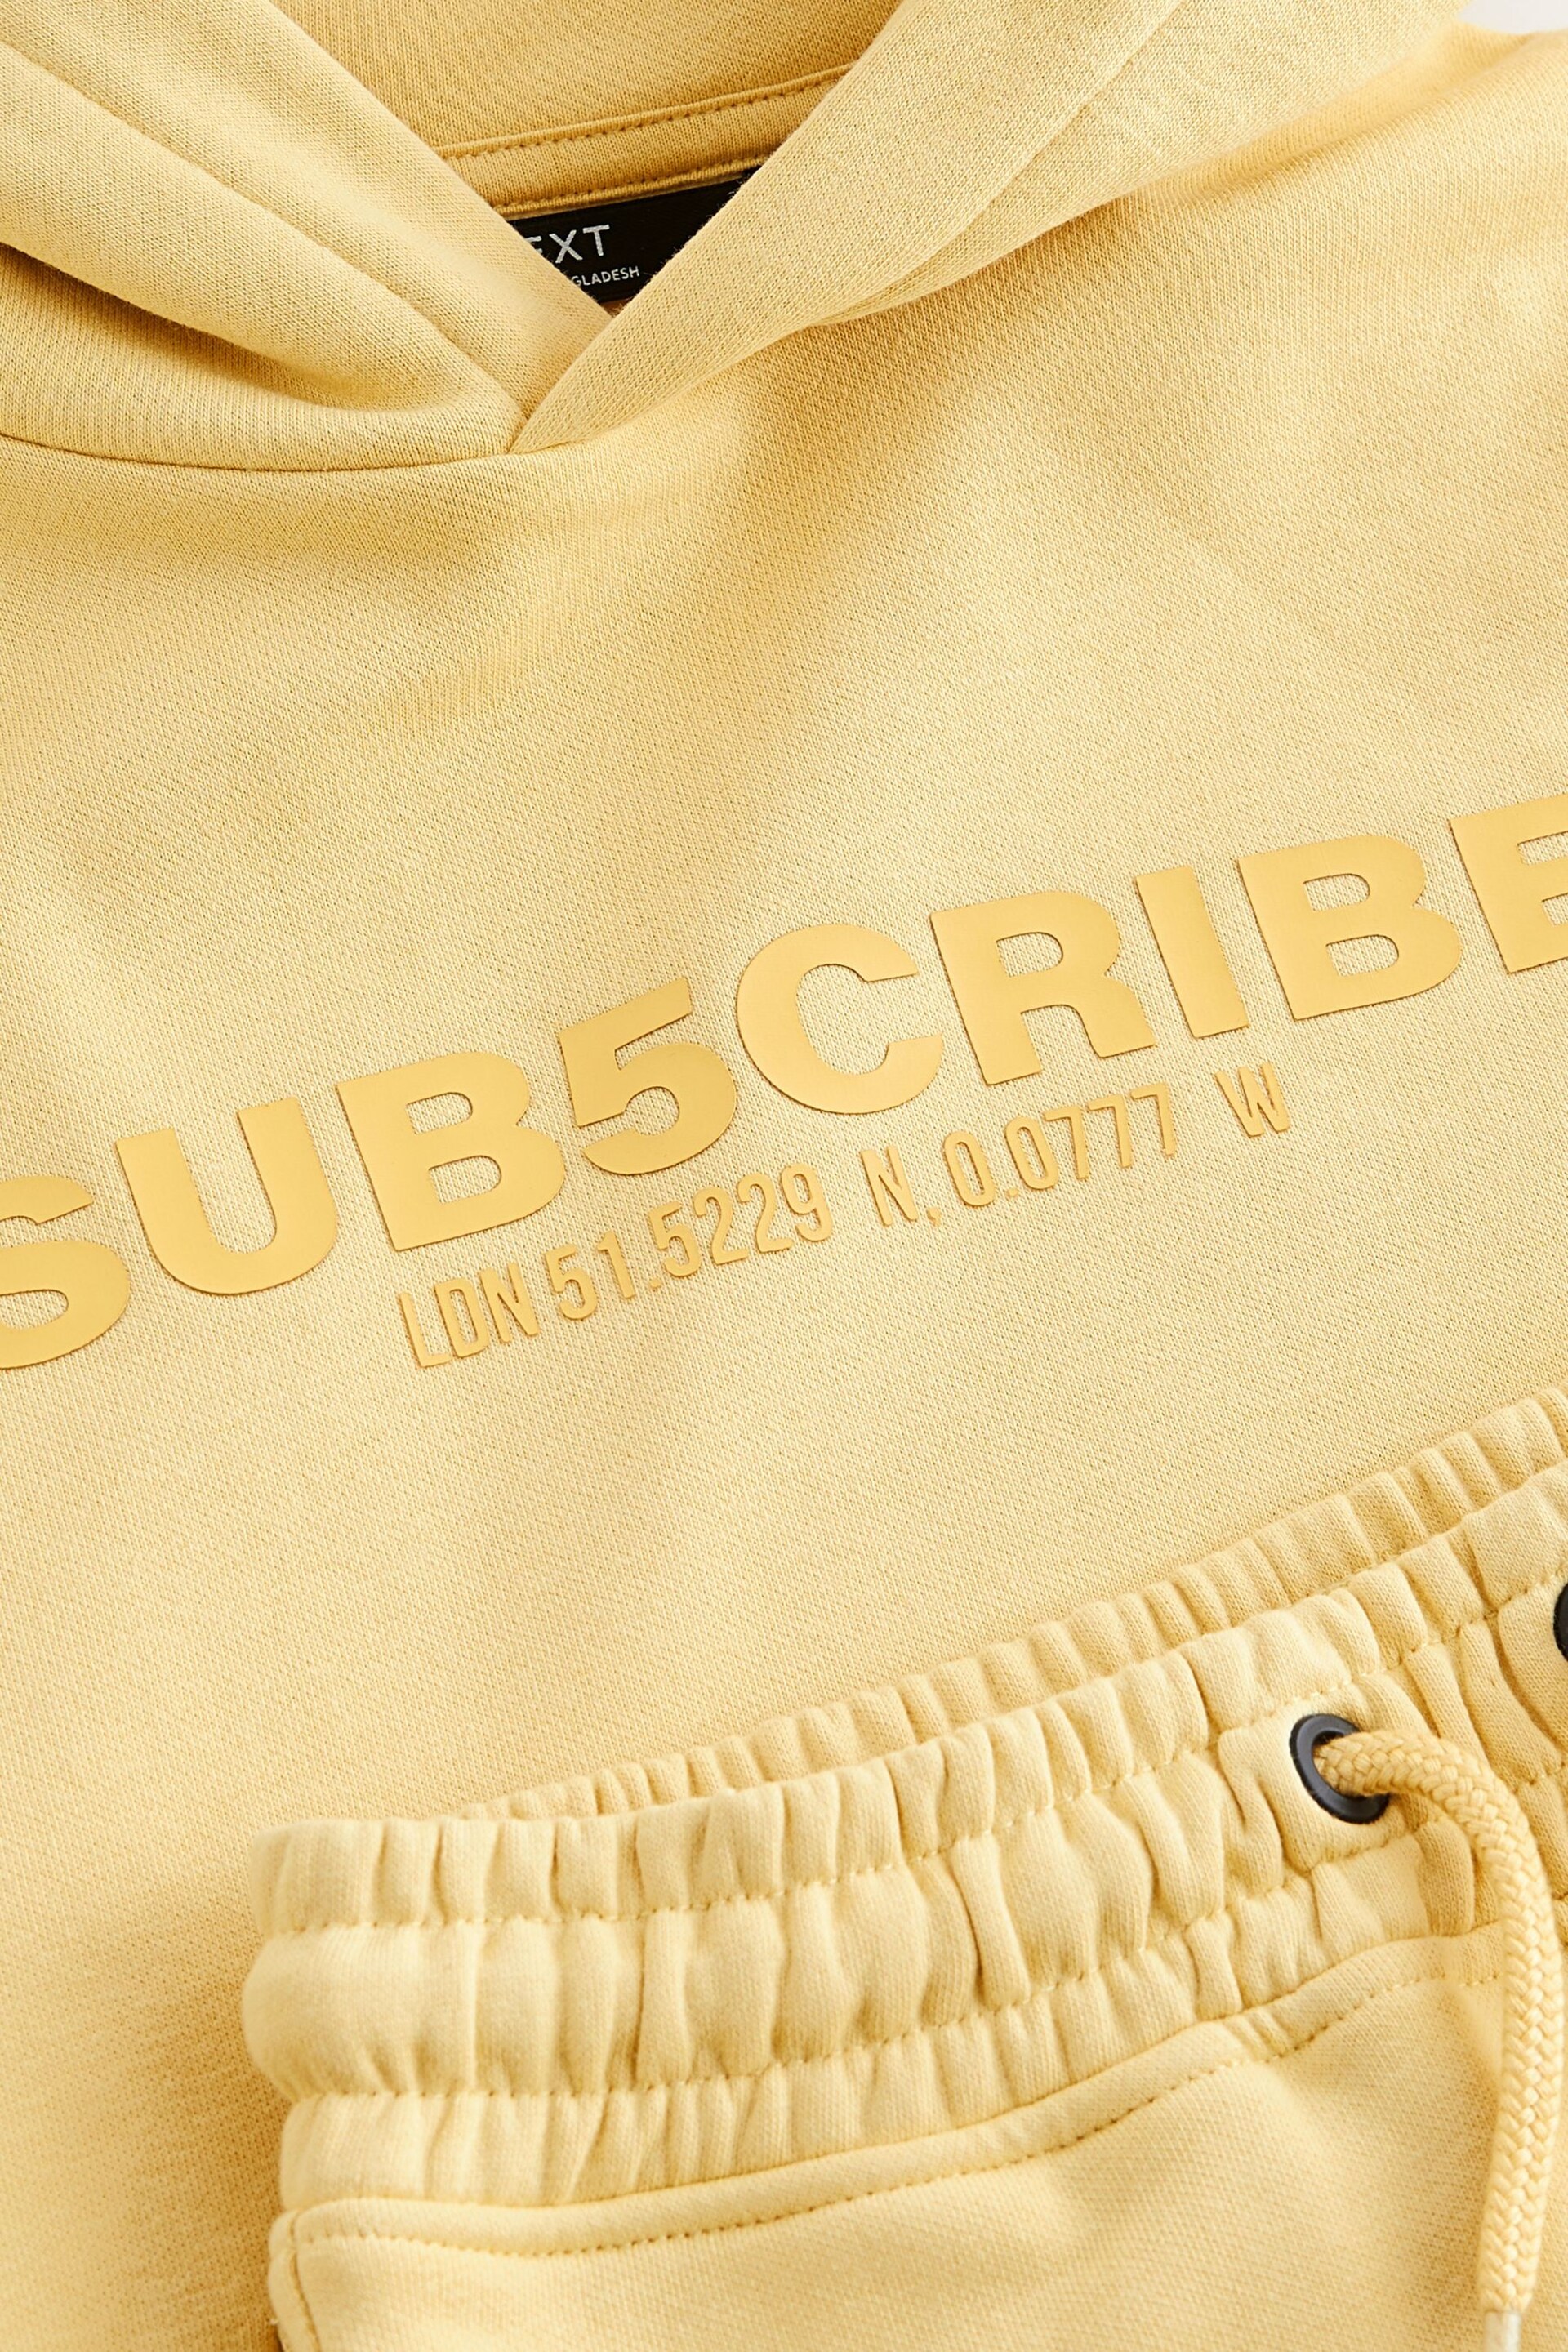 Buttermilk Yellow Short Sleeve Hoodie and Shorts Set (3-16yrs) - Image 6 of 6